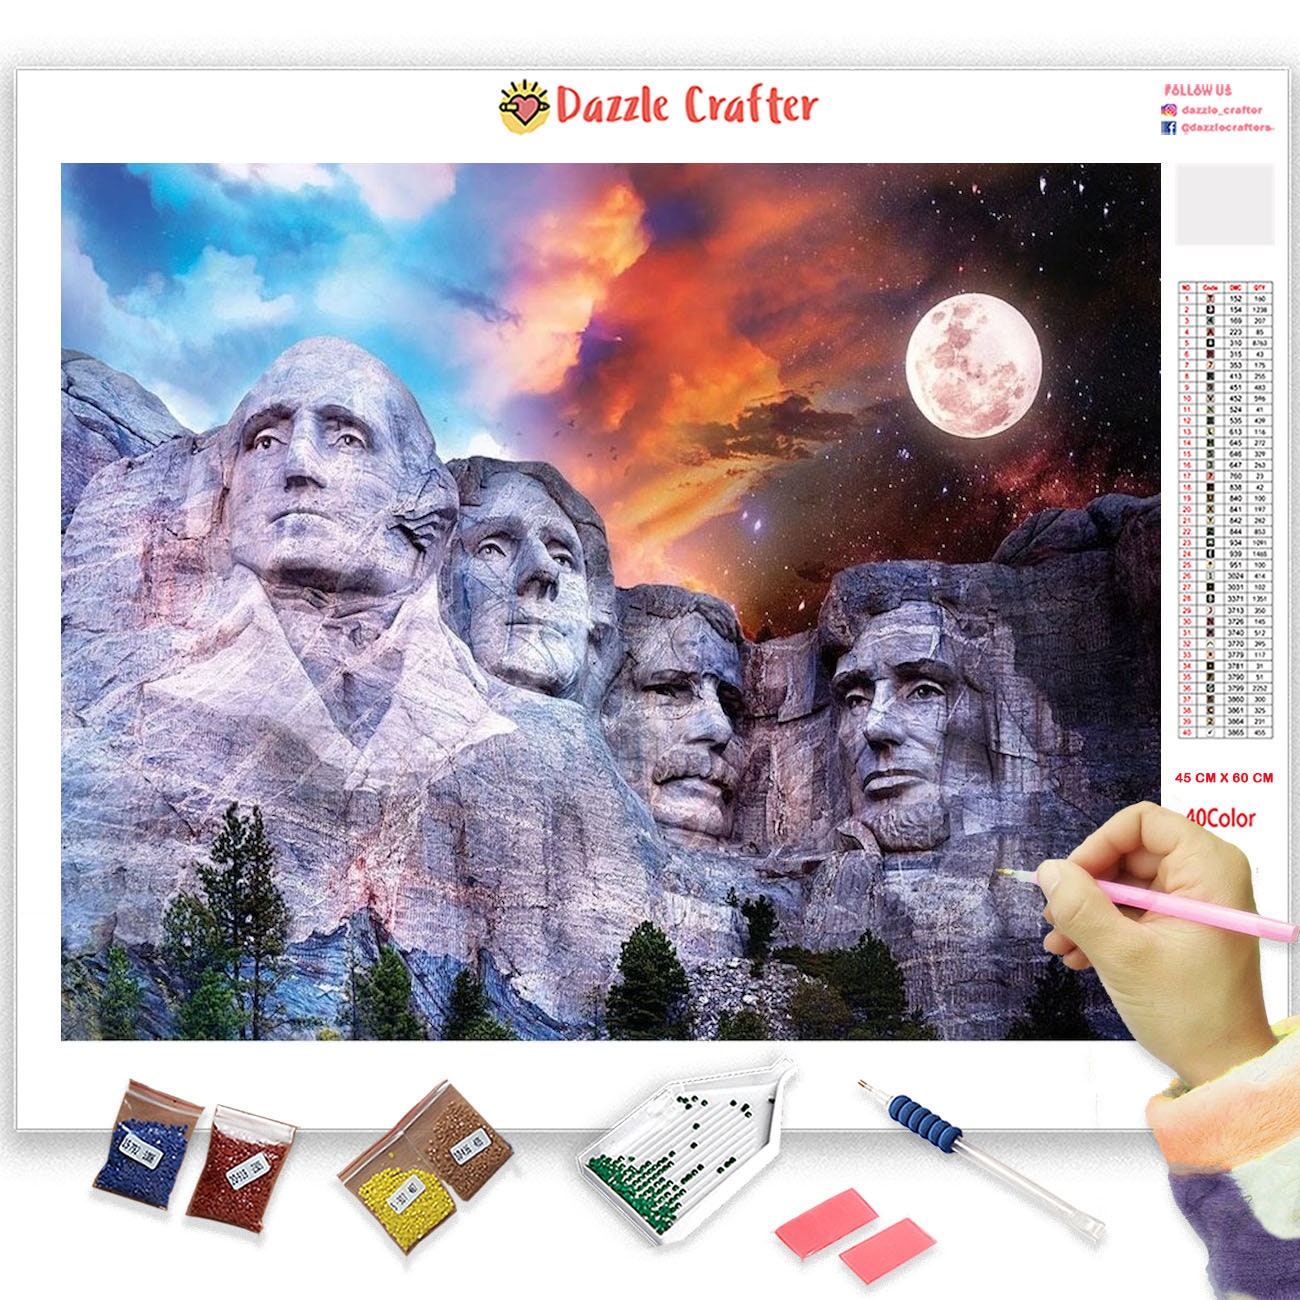 Deluxe Diamond Painting Square Drill DIY Kit_ 70cm x 50cm - F0306, Shop  Today. Get it Tomorrow!